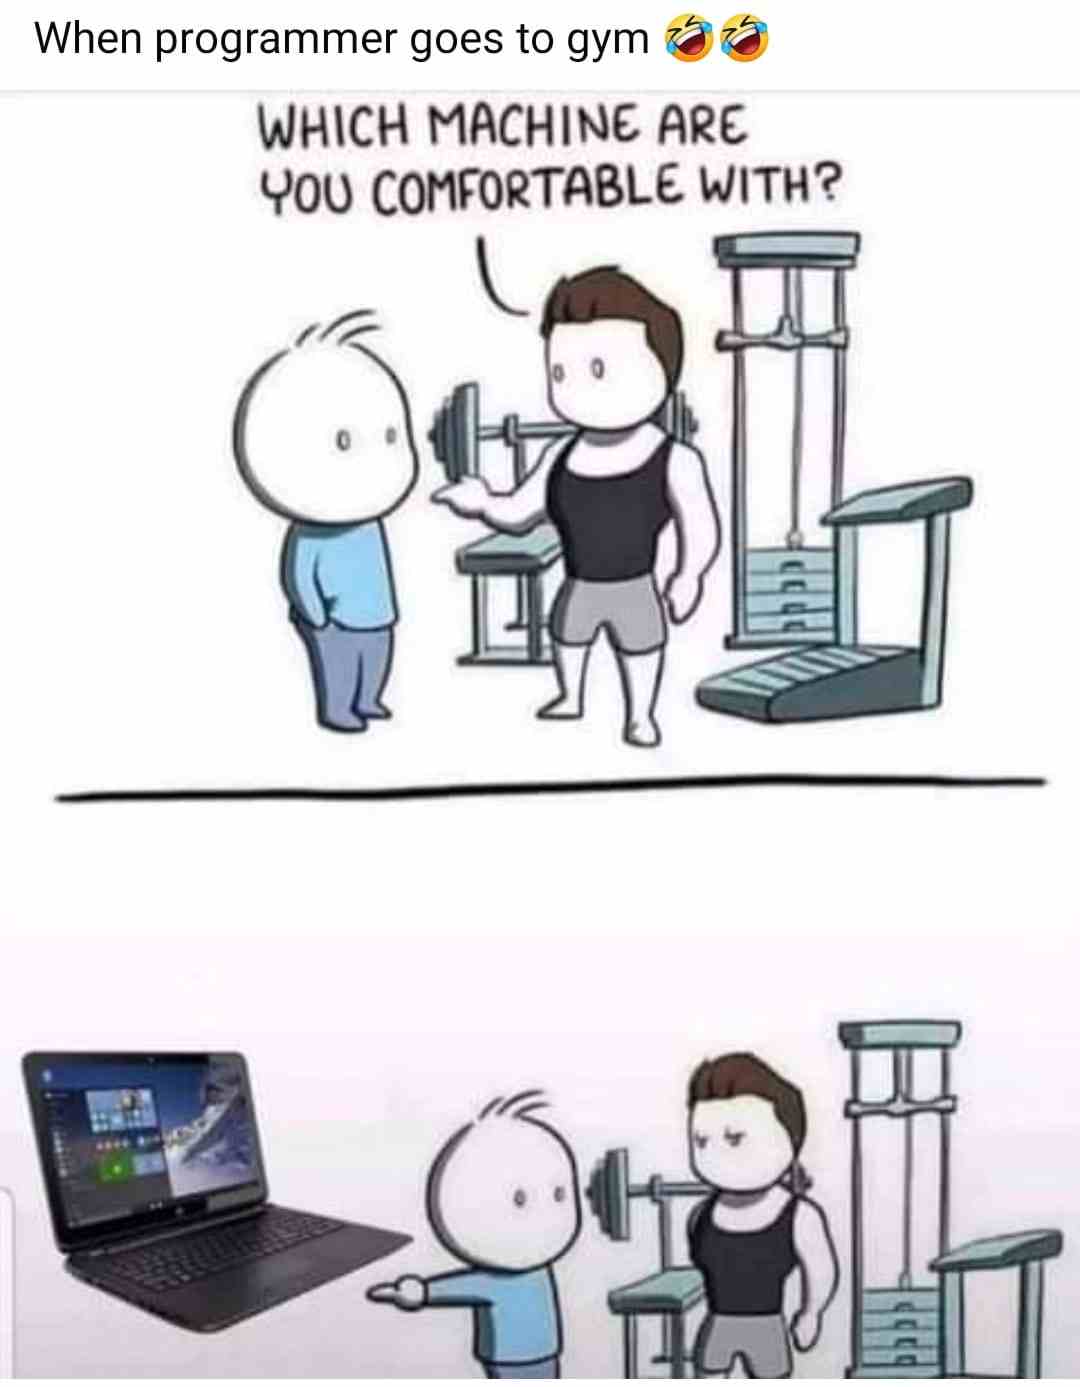 When Programmer goes to gym